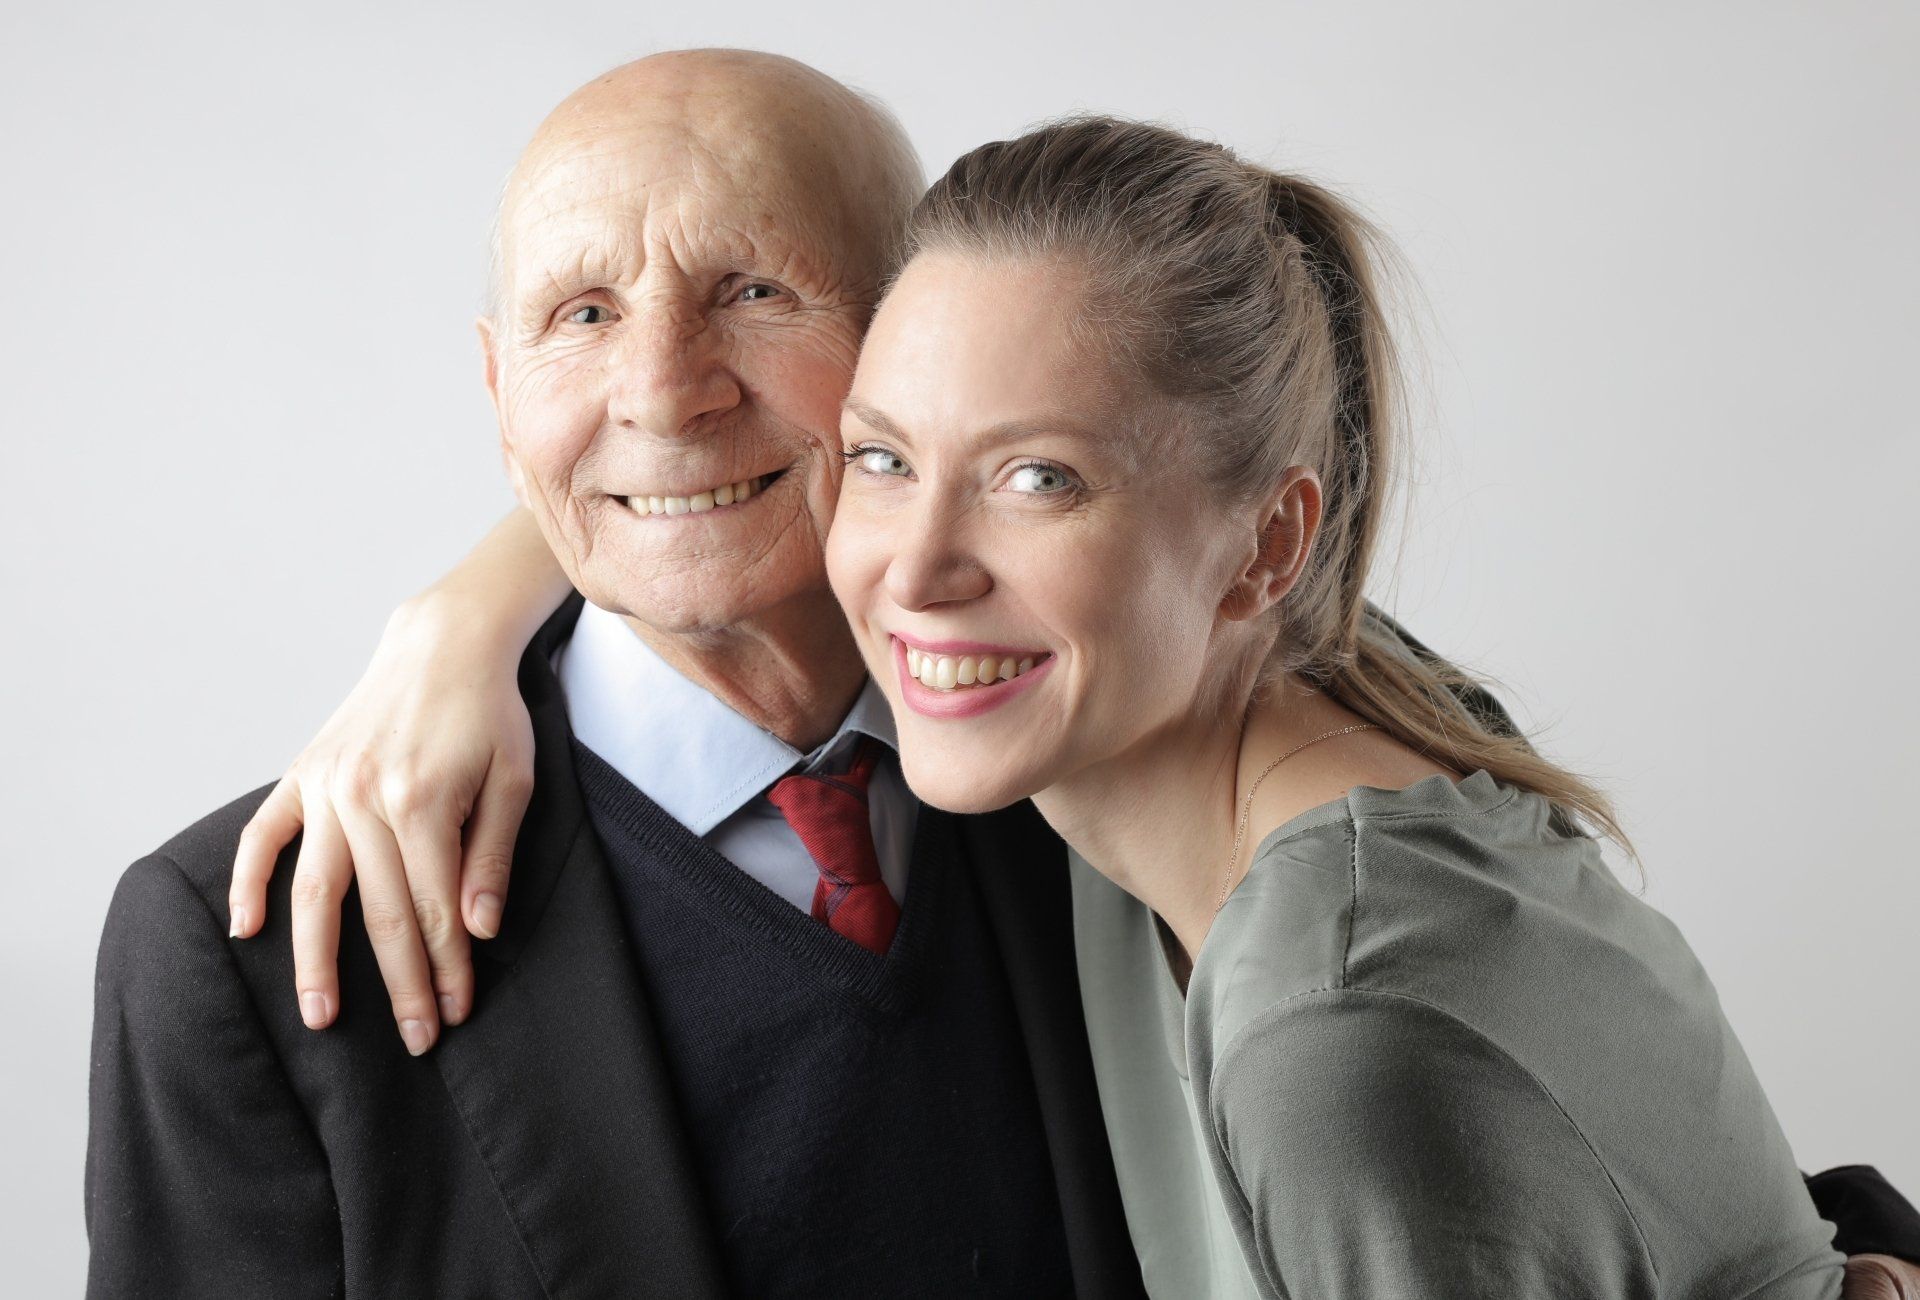 a young woman is hugging an older man in a suit and tie .